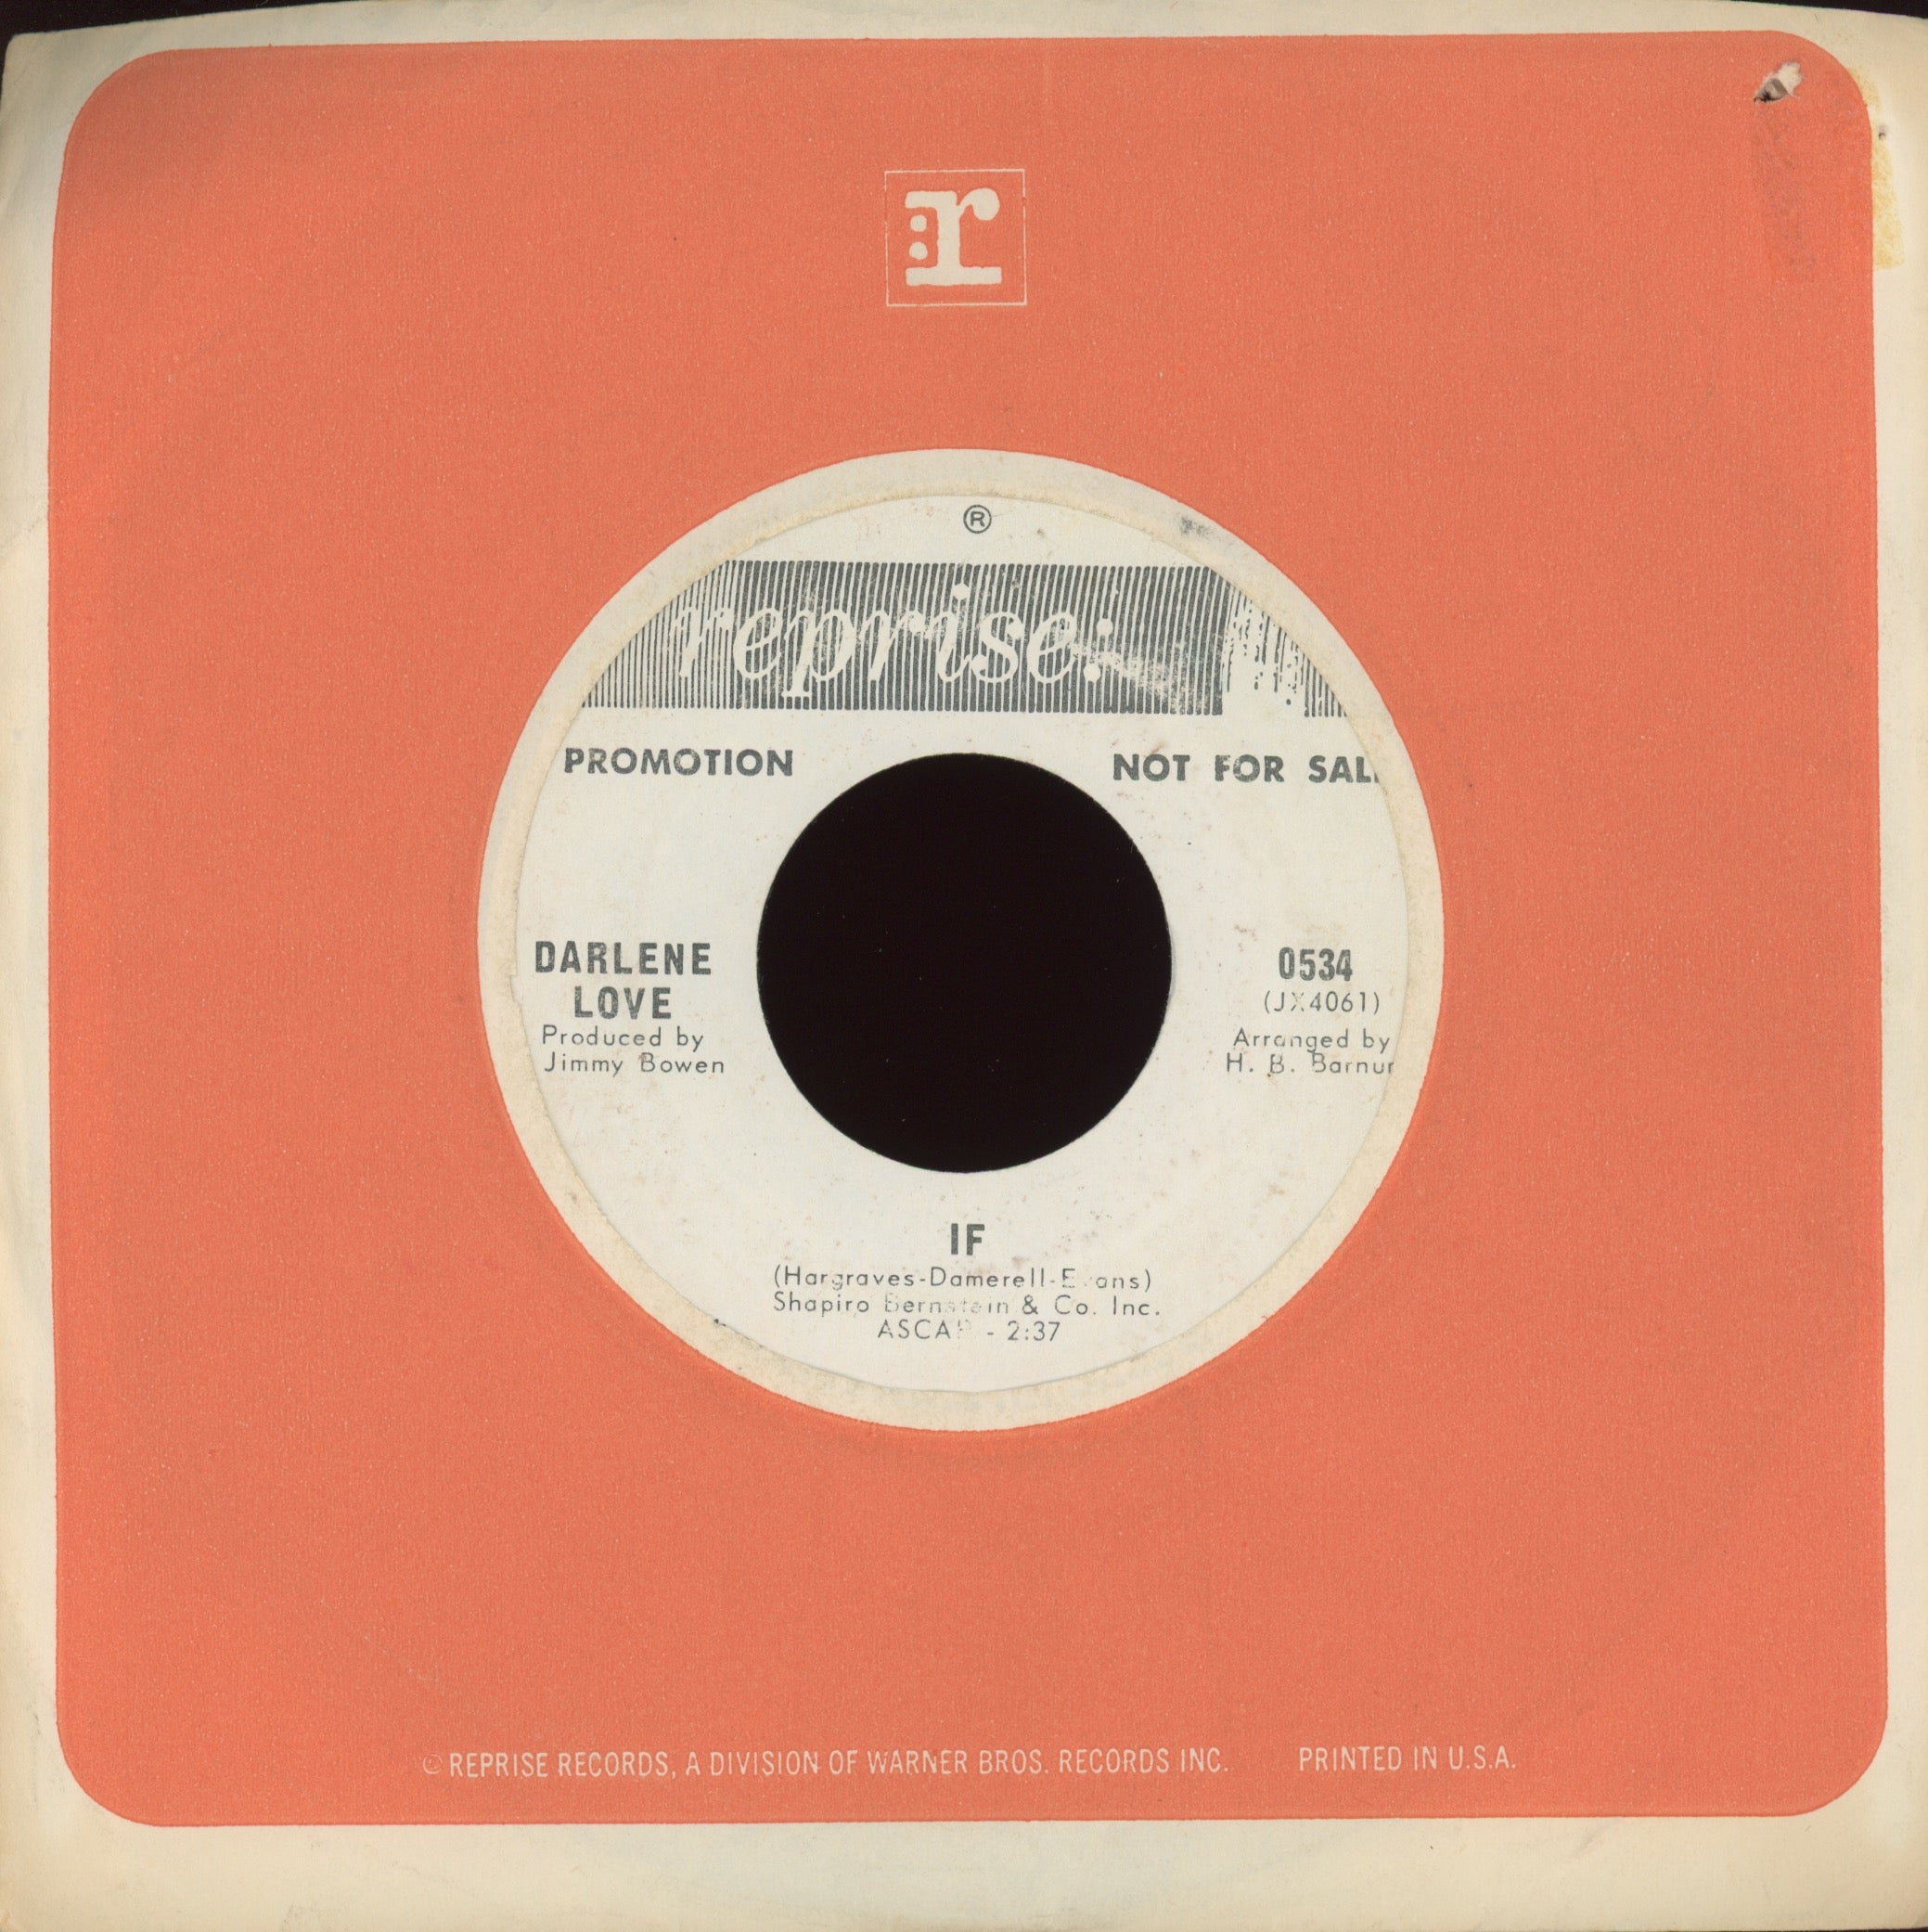 Darlene Love - Too Late To Say You're Sorry on Reprise Promo Northern Soul 45